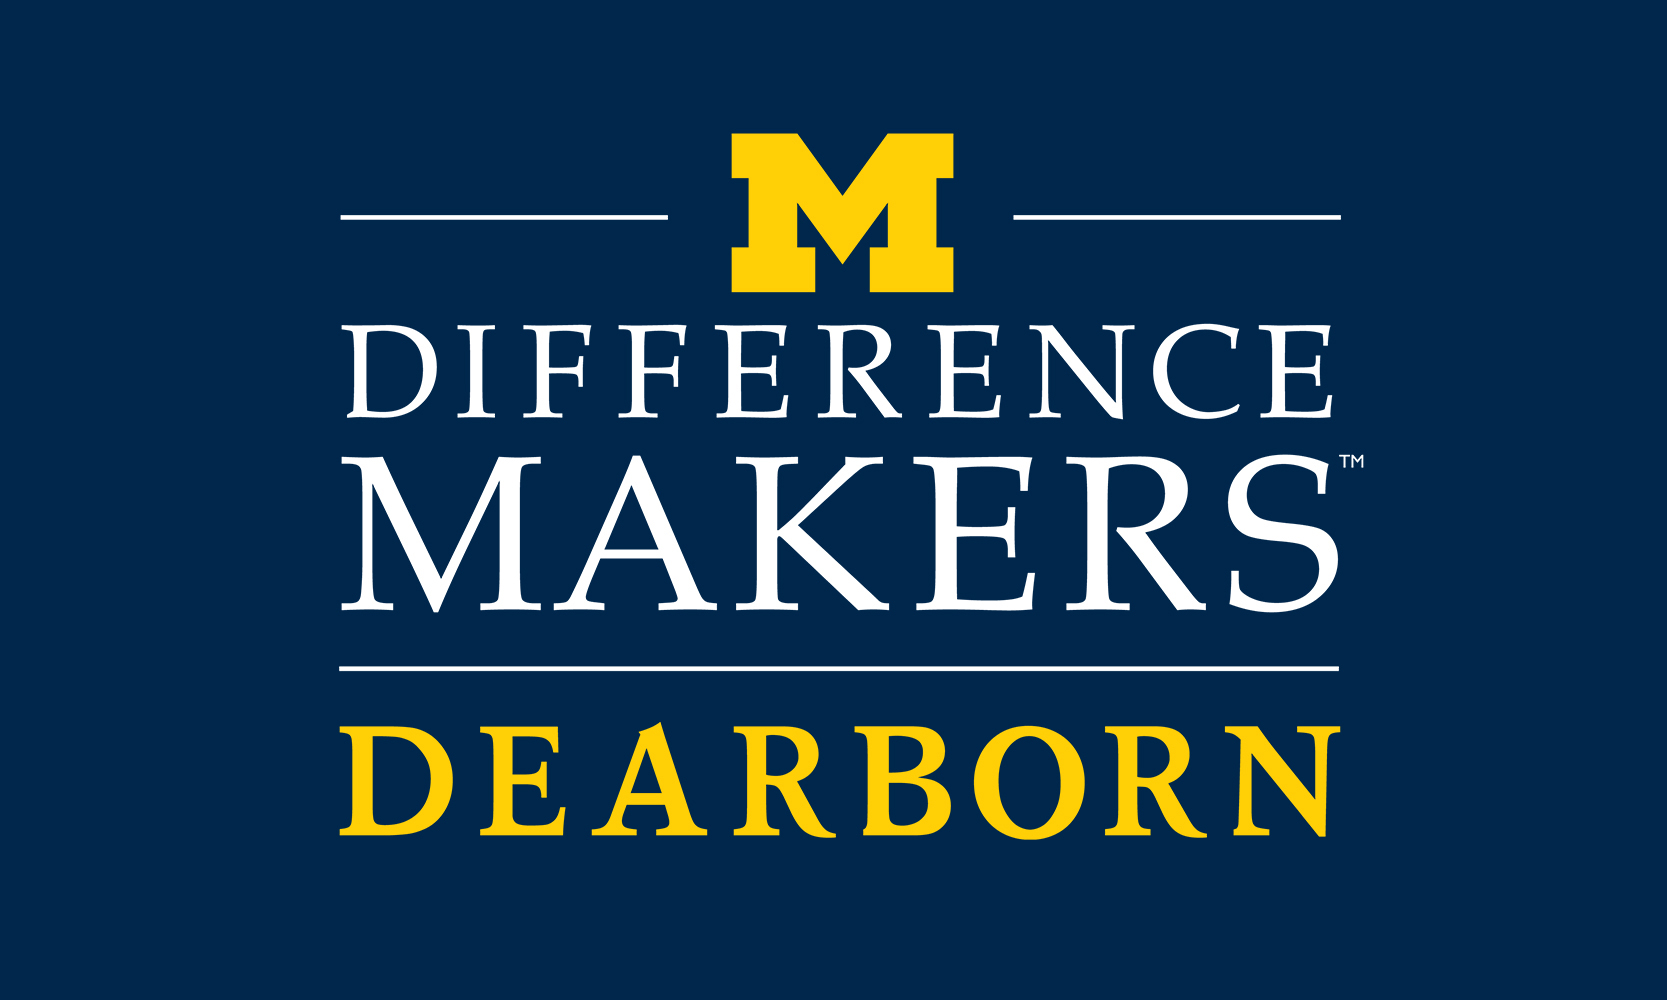 UM-Dearborn Difference Makers logo